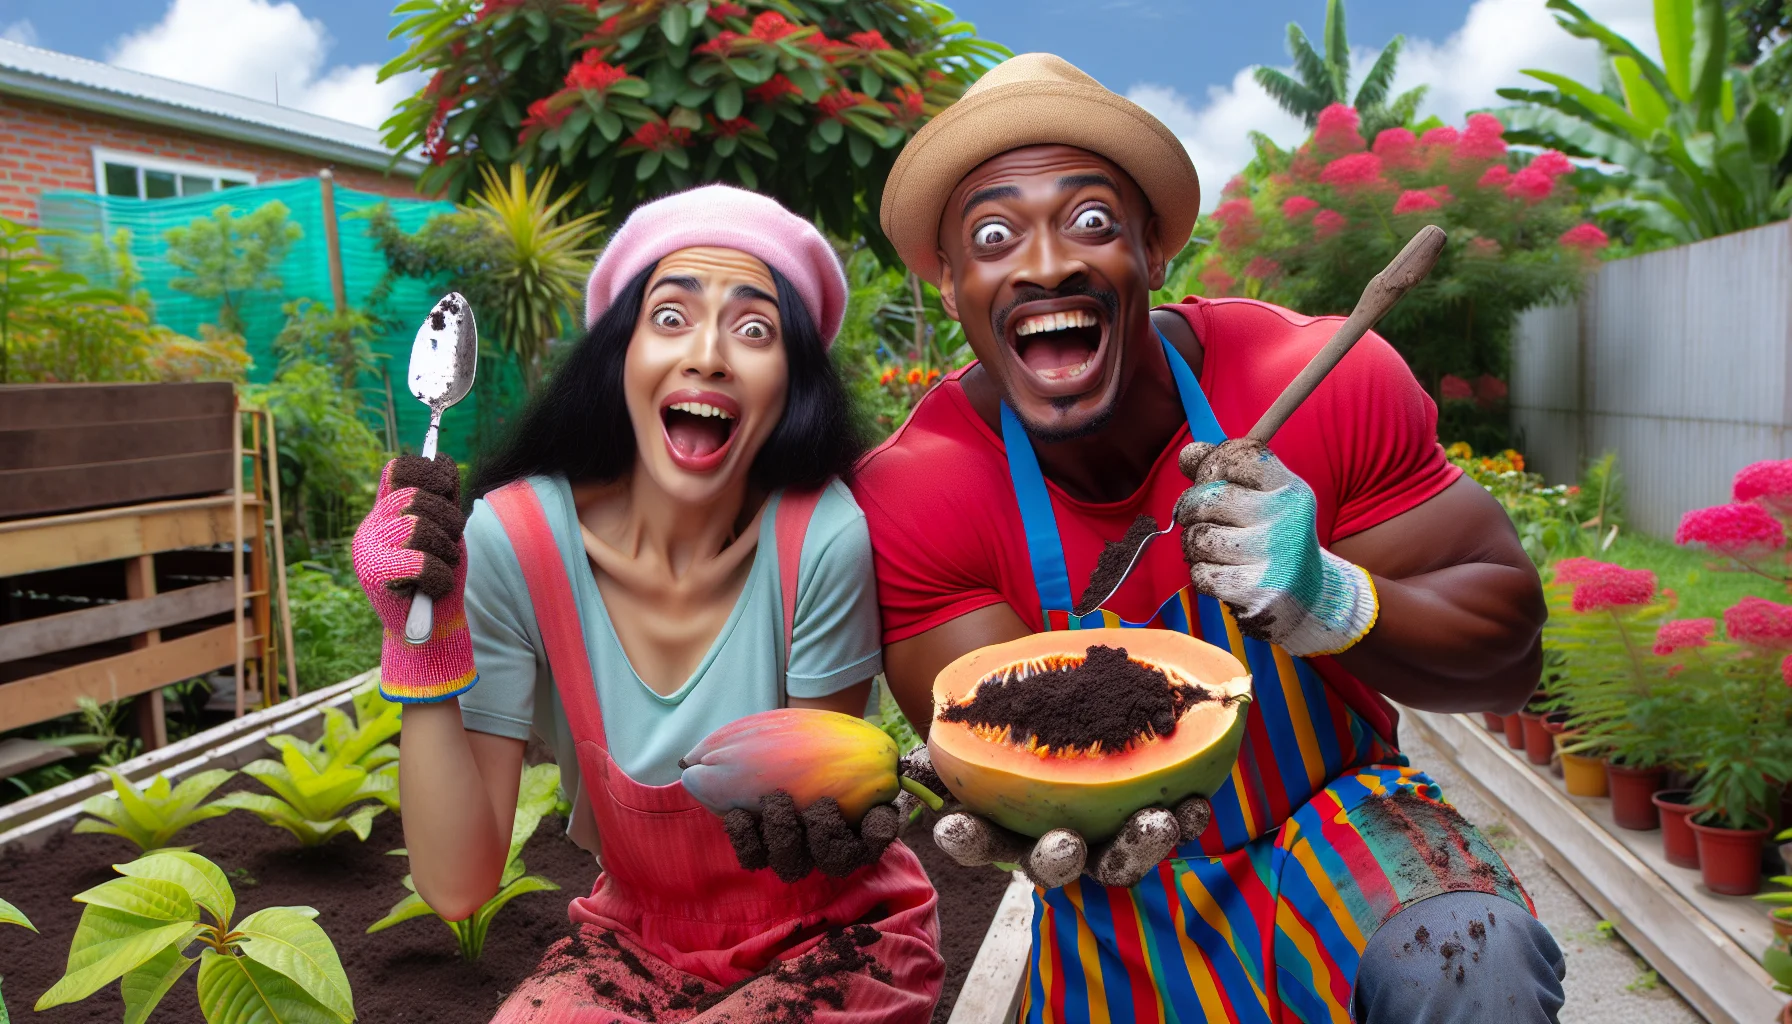 Picture a humorous gardening scene. In the foreground, a Middle-Eastern woman is seen laughing, holding a paw paw fruit with a spoon stuck in it. She appears to be making funny surprised faces as she tastes the juicy fruit. To her side, a Black man grinning broadly, proudly holds out a large ripe paw paw harvested from a lush paw paw tree nearby. They are dressed in colorful gardening gear with dirt smudged faces, implying they just dug up this fruit. Behind them, a well-manicured garden brims with various plants and flowers, giving a vibrant backdrop to this joyful scenario.